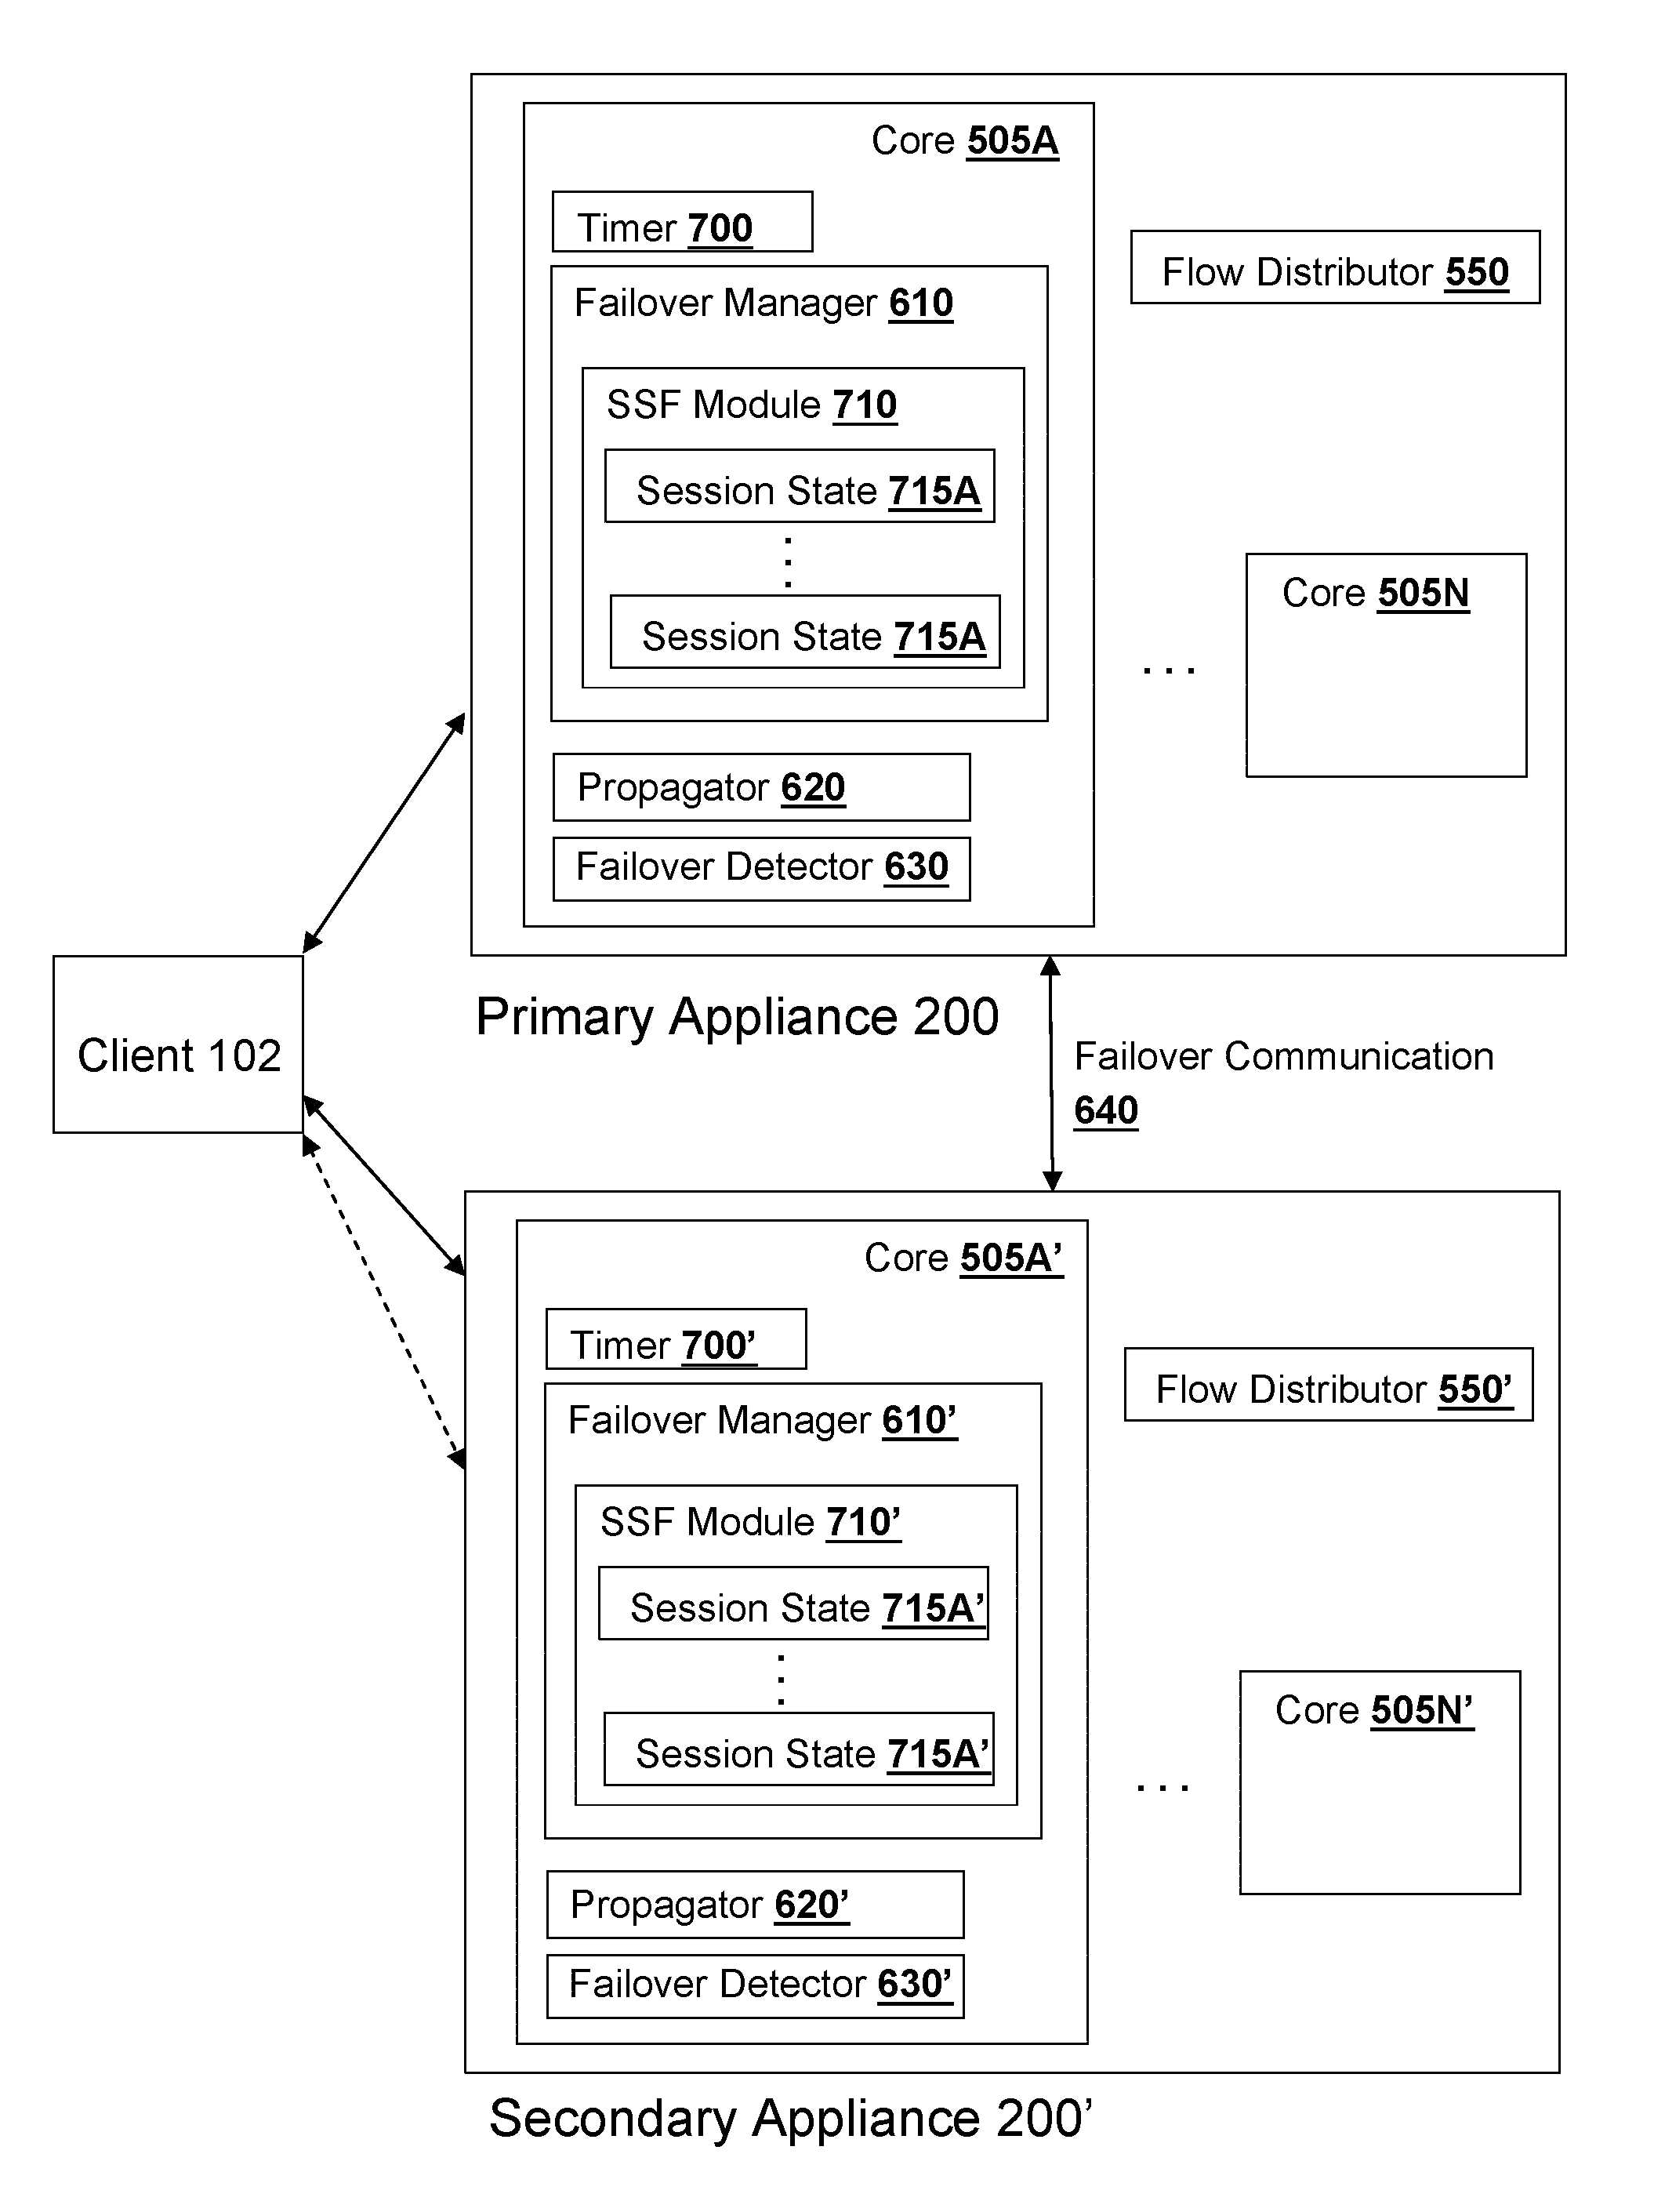 Systems and methods for stateful session failover between multi-core appliances